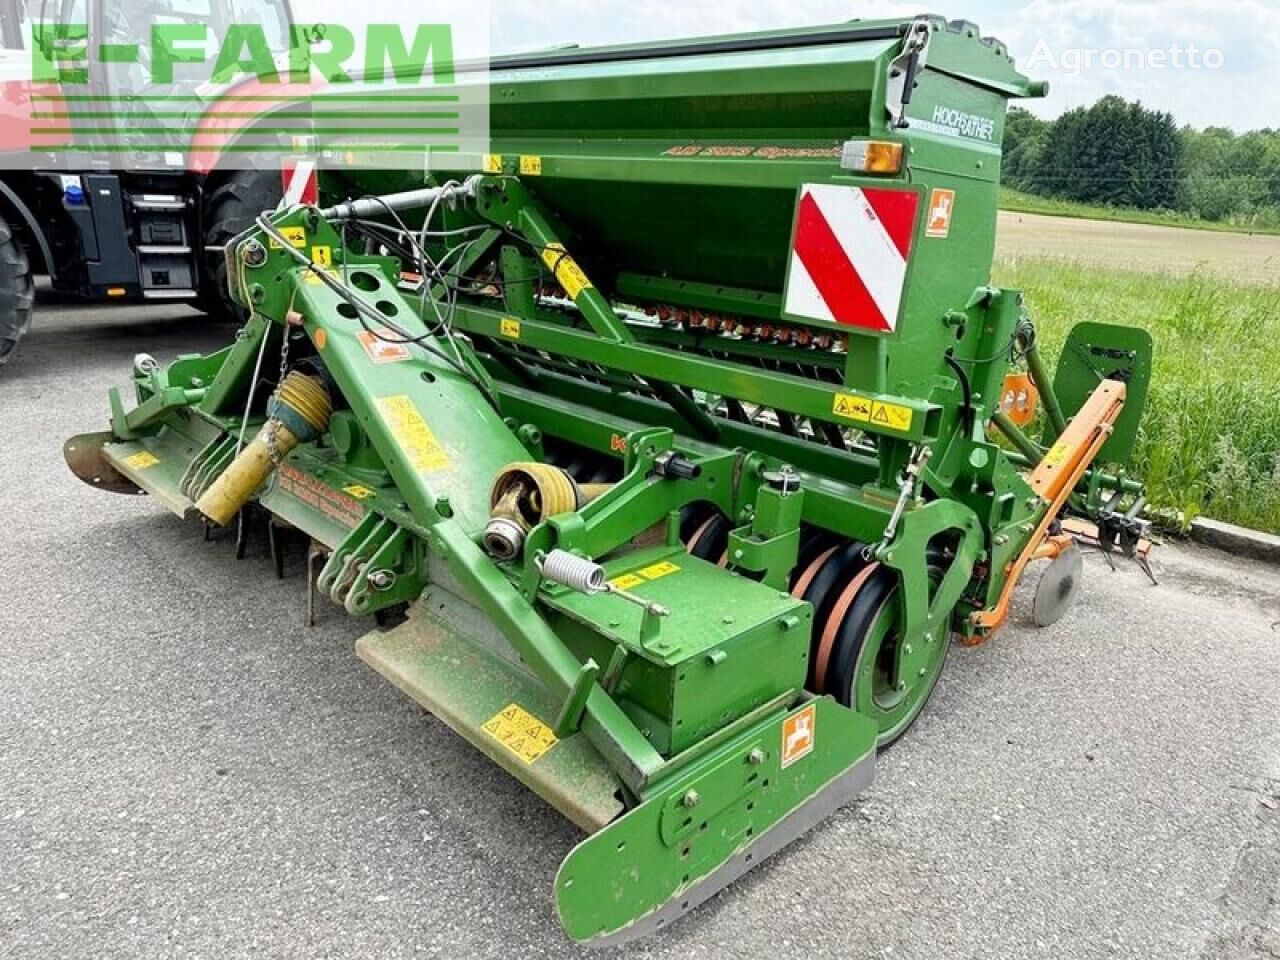 kg3000/ad303 special säkombination combine seed drill